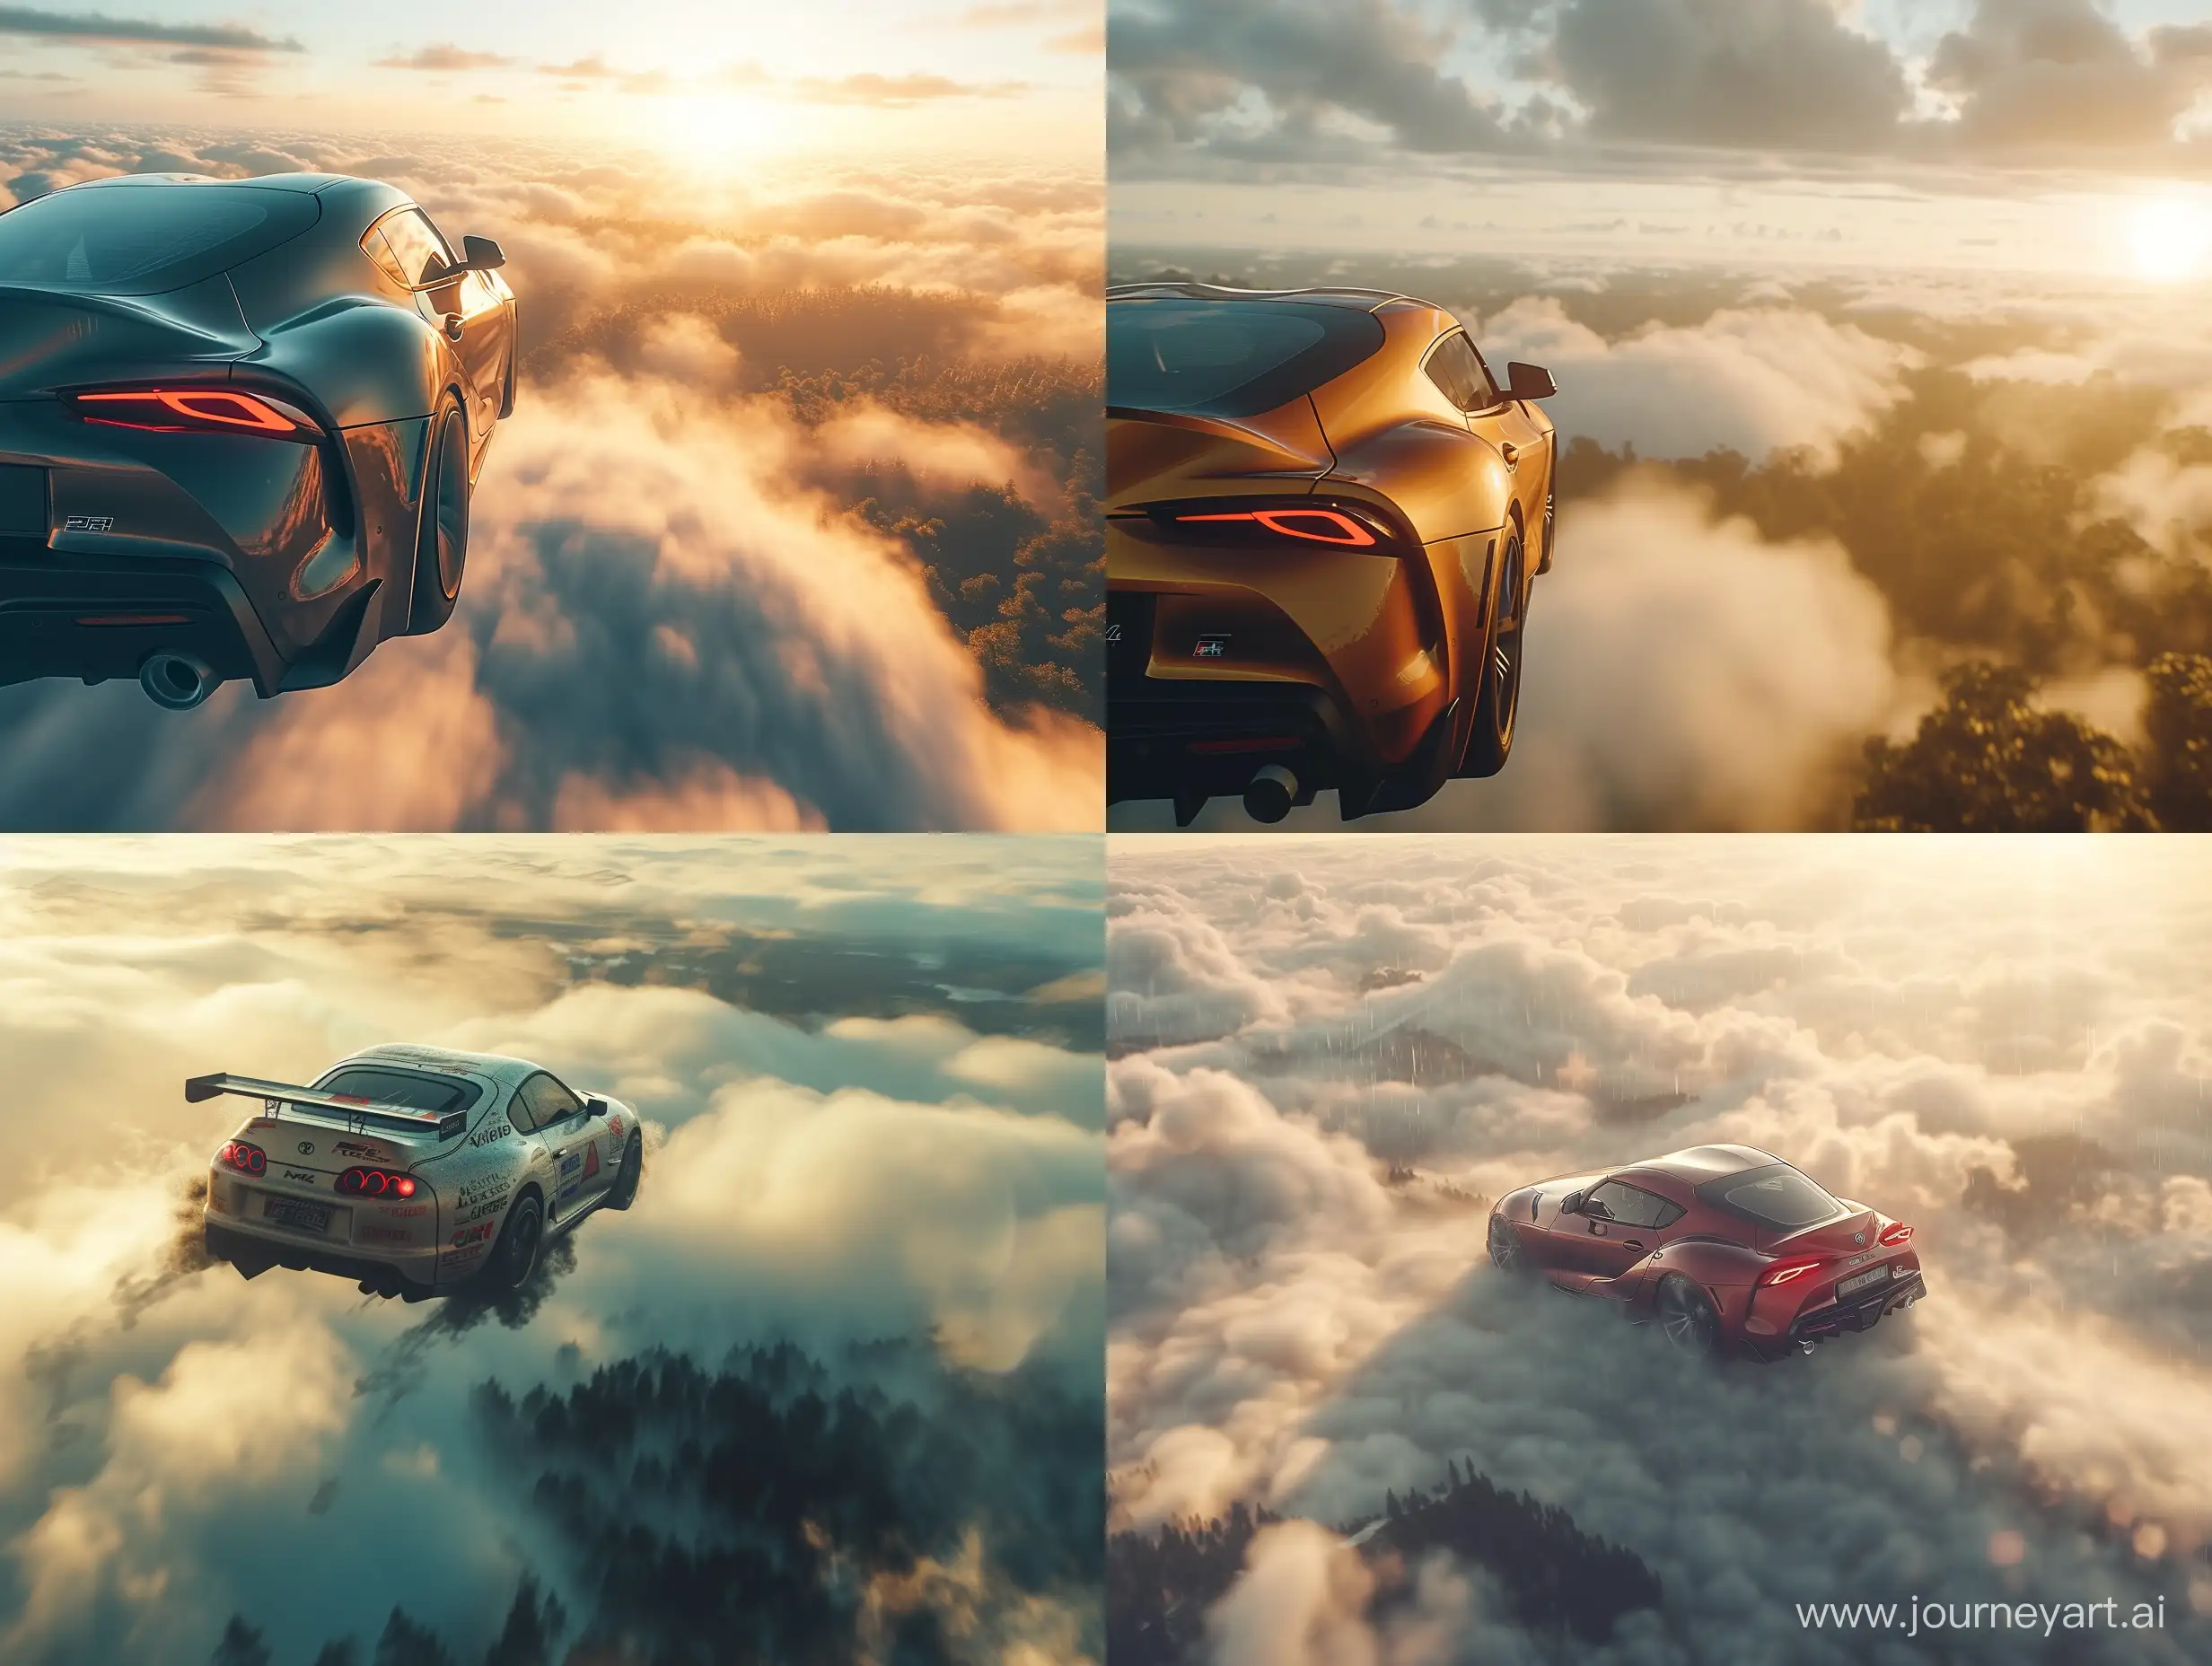 High-Angle-View-of-Supra-MK4-Car-Soaring-Above-Clouds-with-Forest-Below